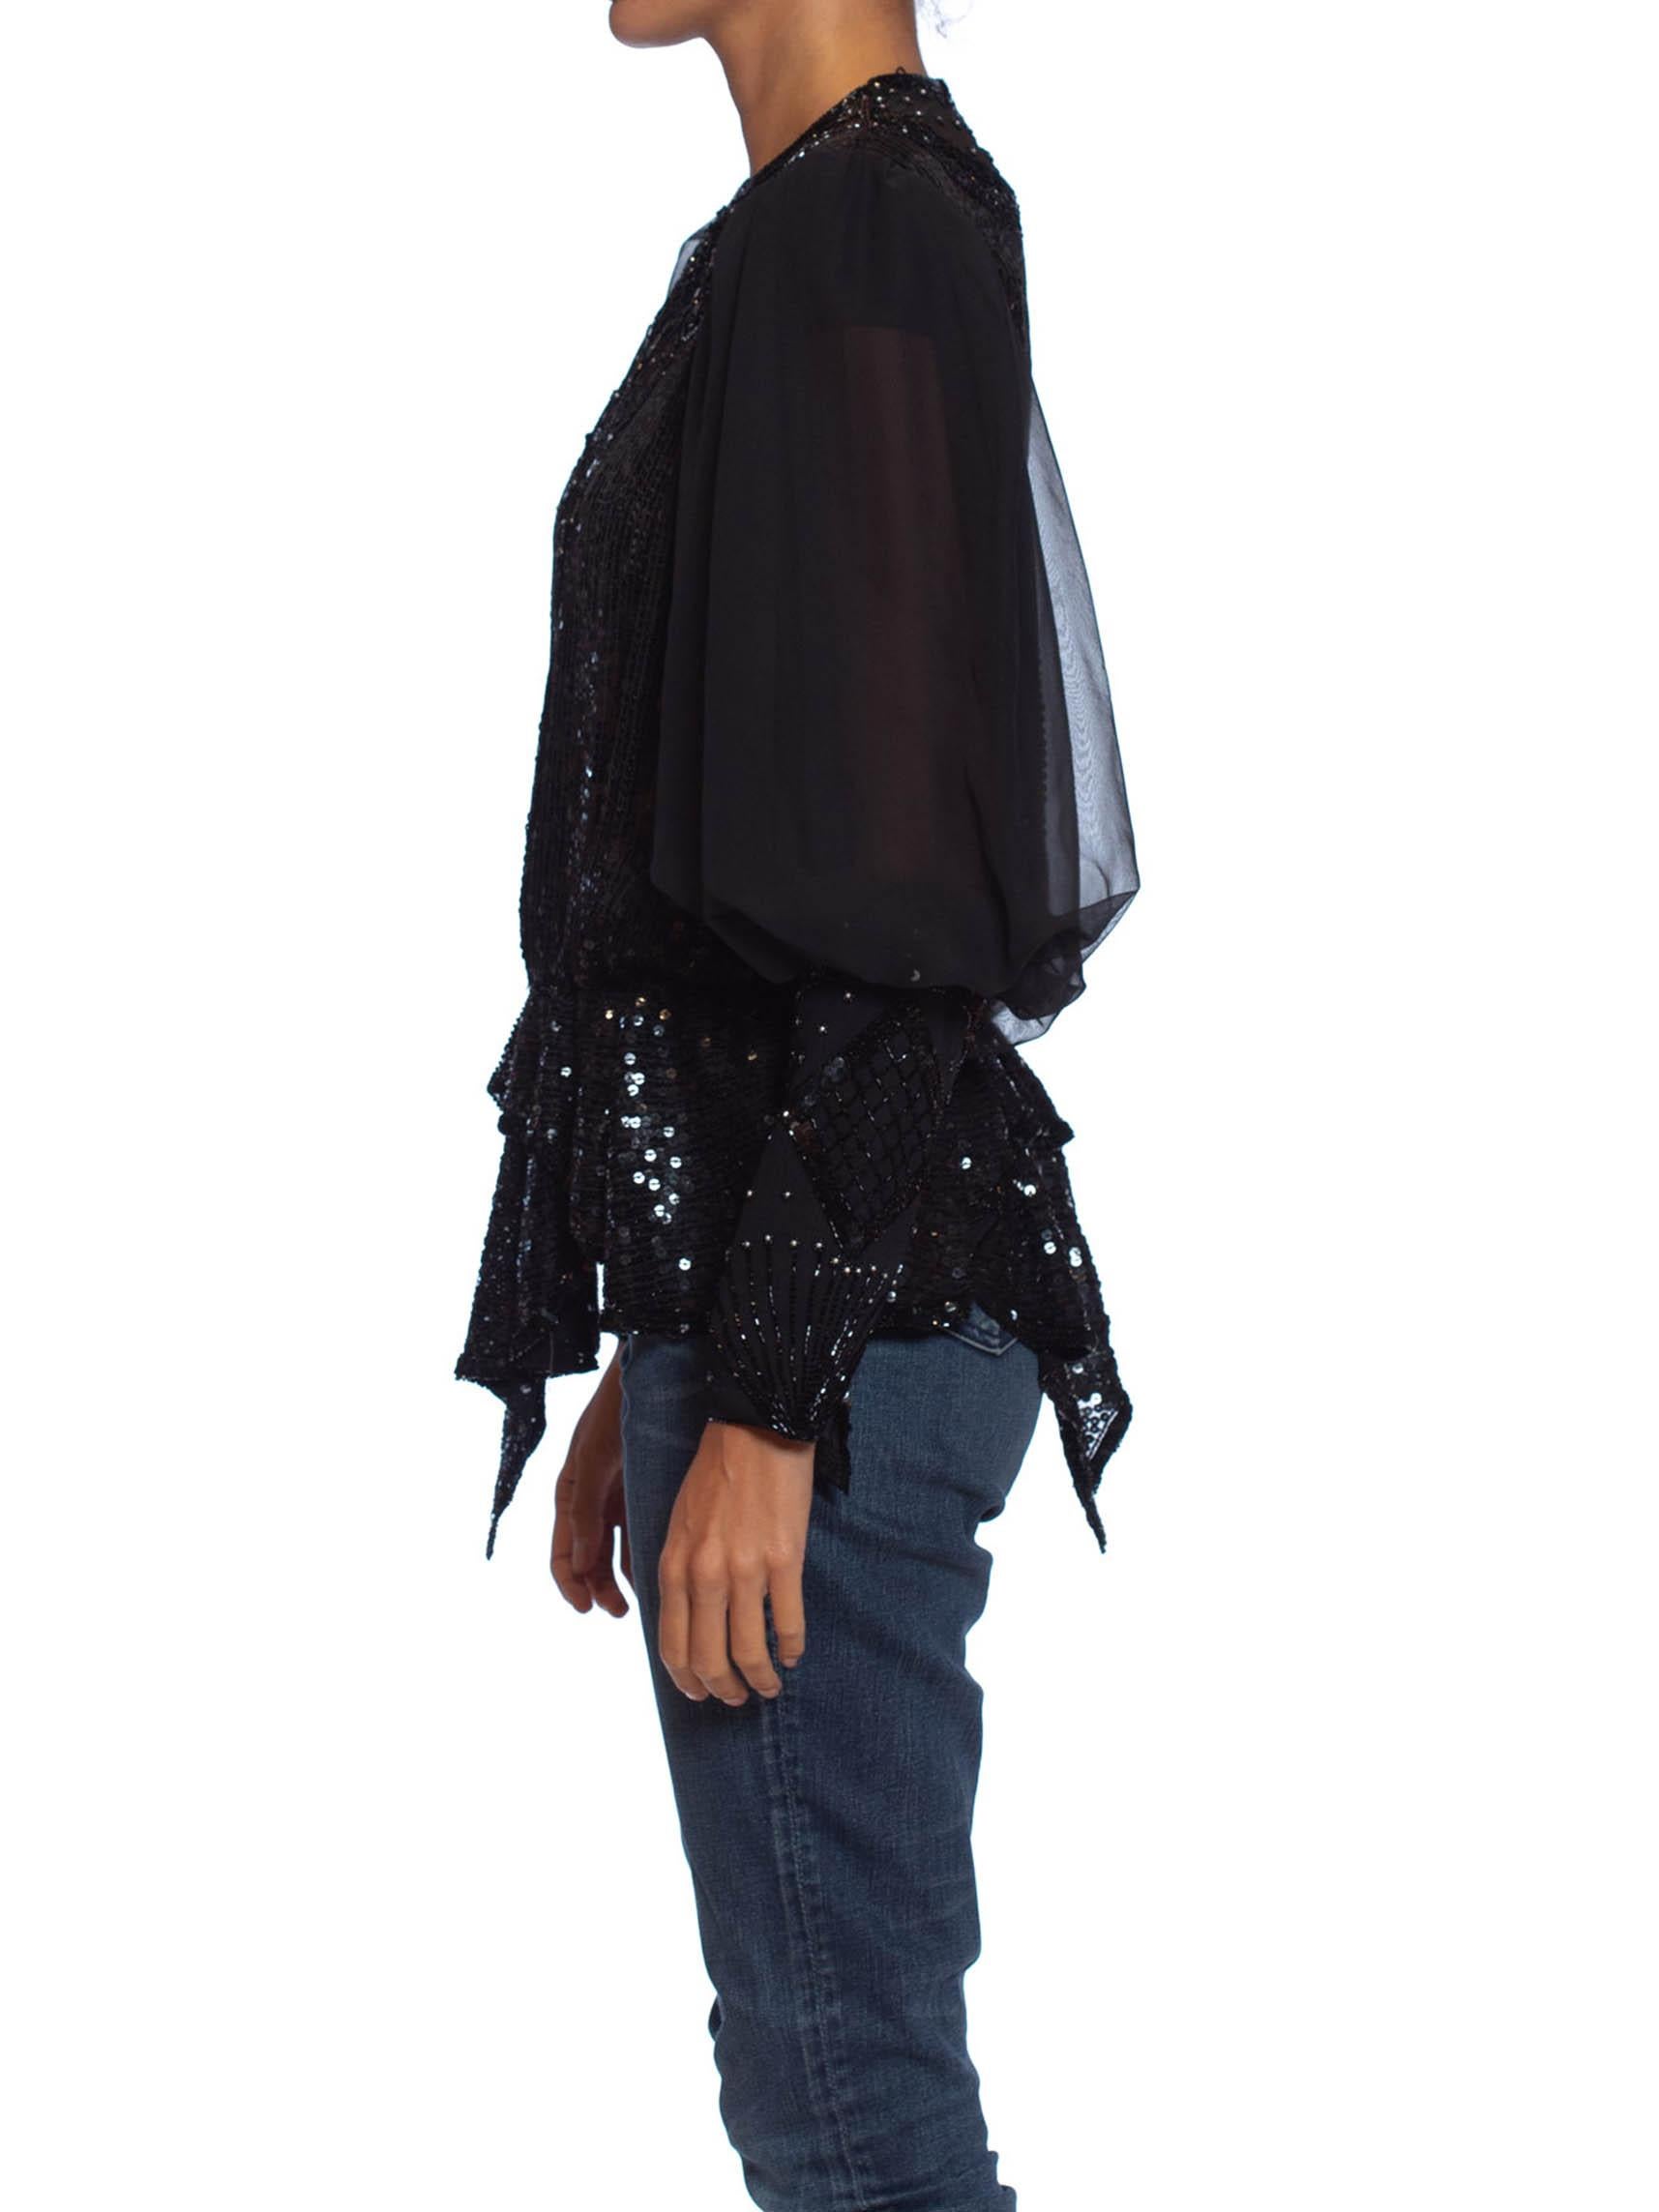 Elastic waist stretches comfortably to 38in 1980S Black Silk & Poly Chiffon Beaded Victorian Style Blouse 